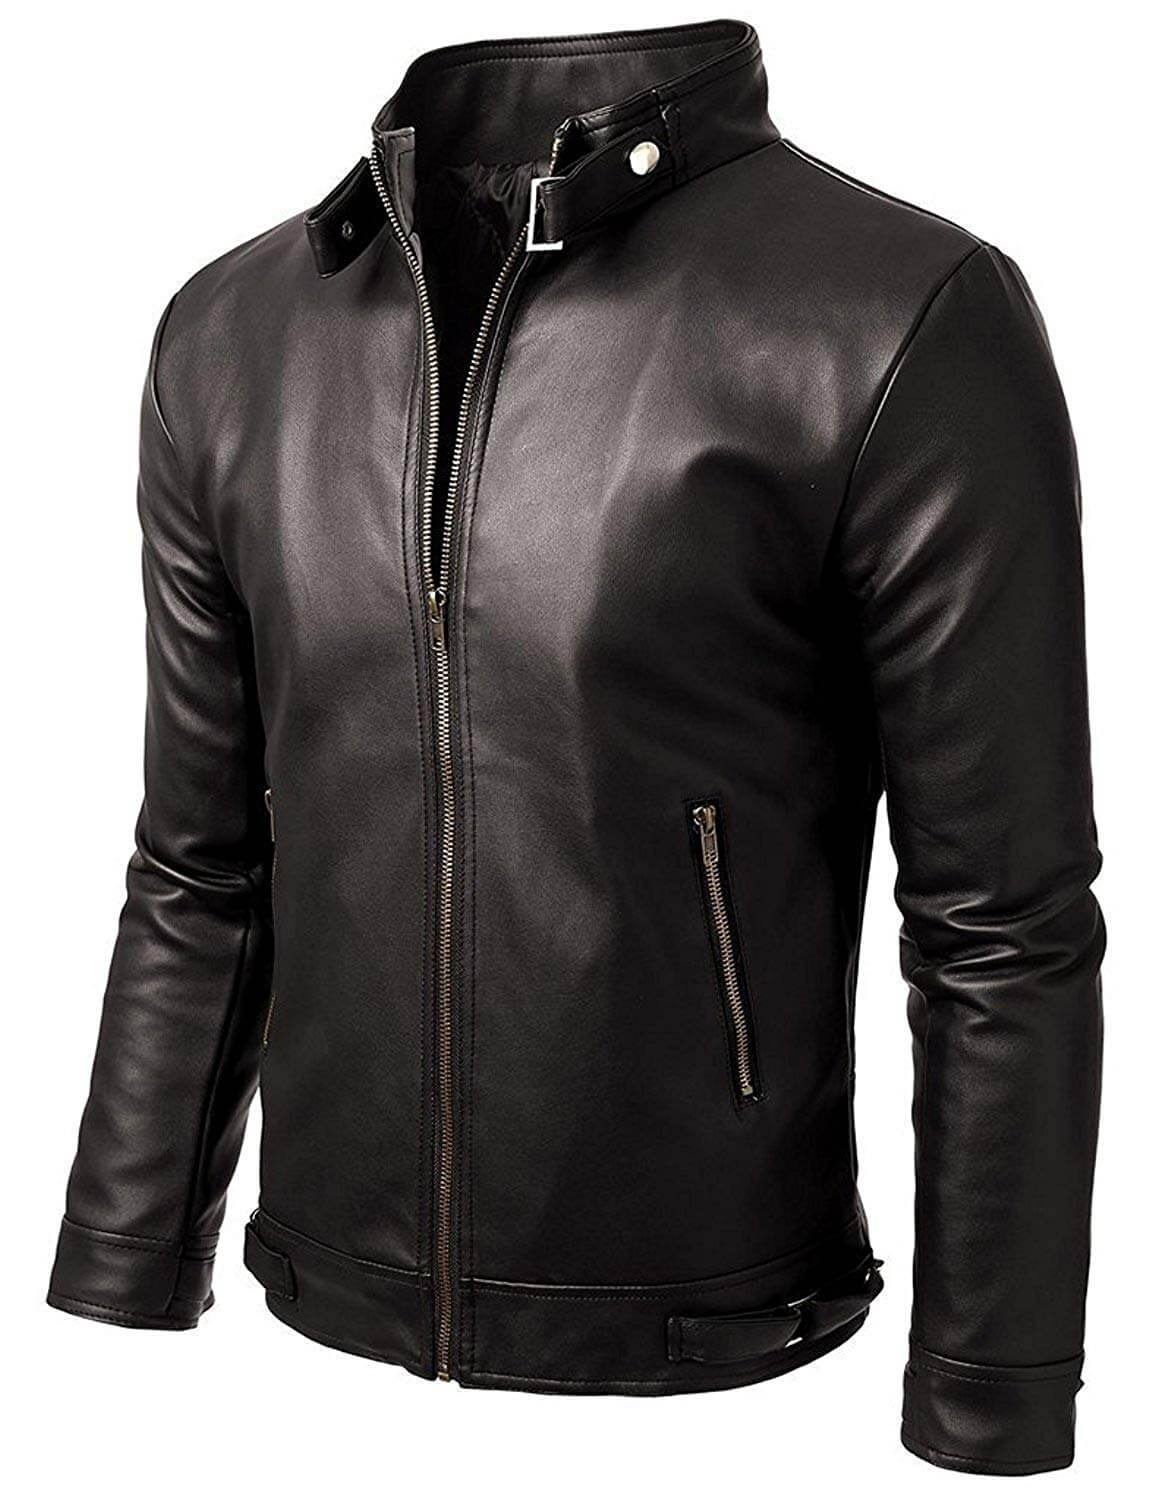 Best Riding Jackets India - Top Biker Jackets at Best Price